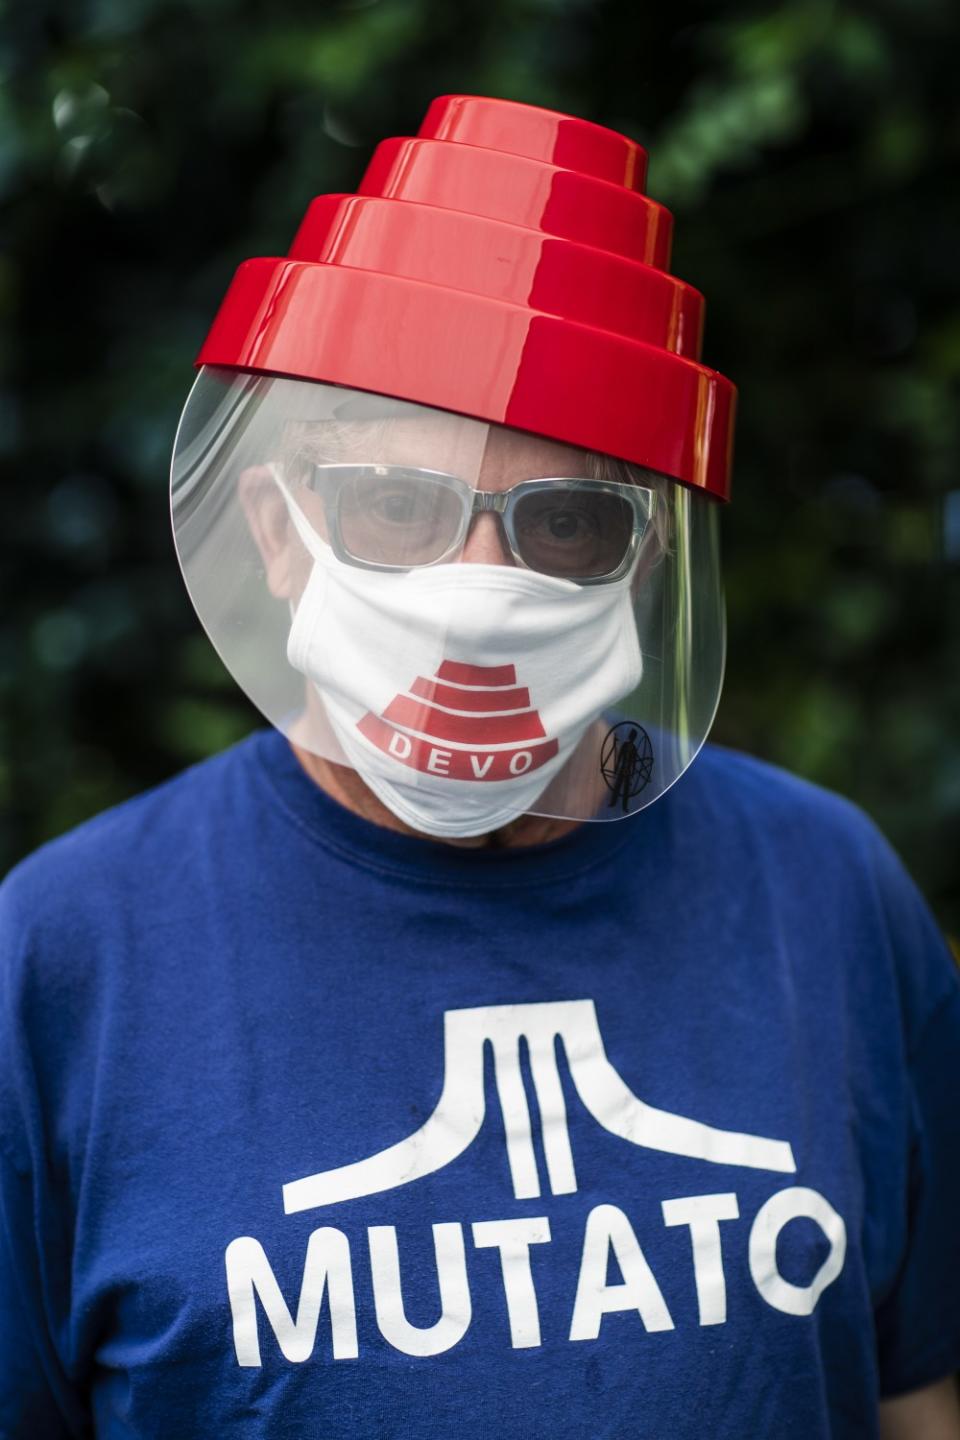 Mark Mothersbaugh survived Covid-19 and is recovering at home. He is photographed wearing official Devo ppe.